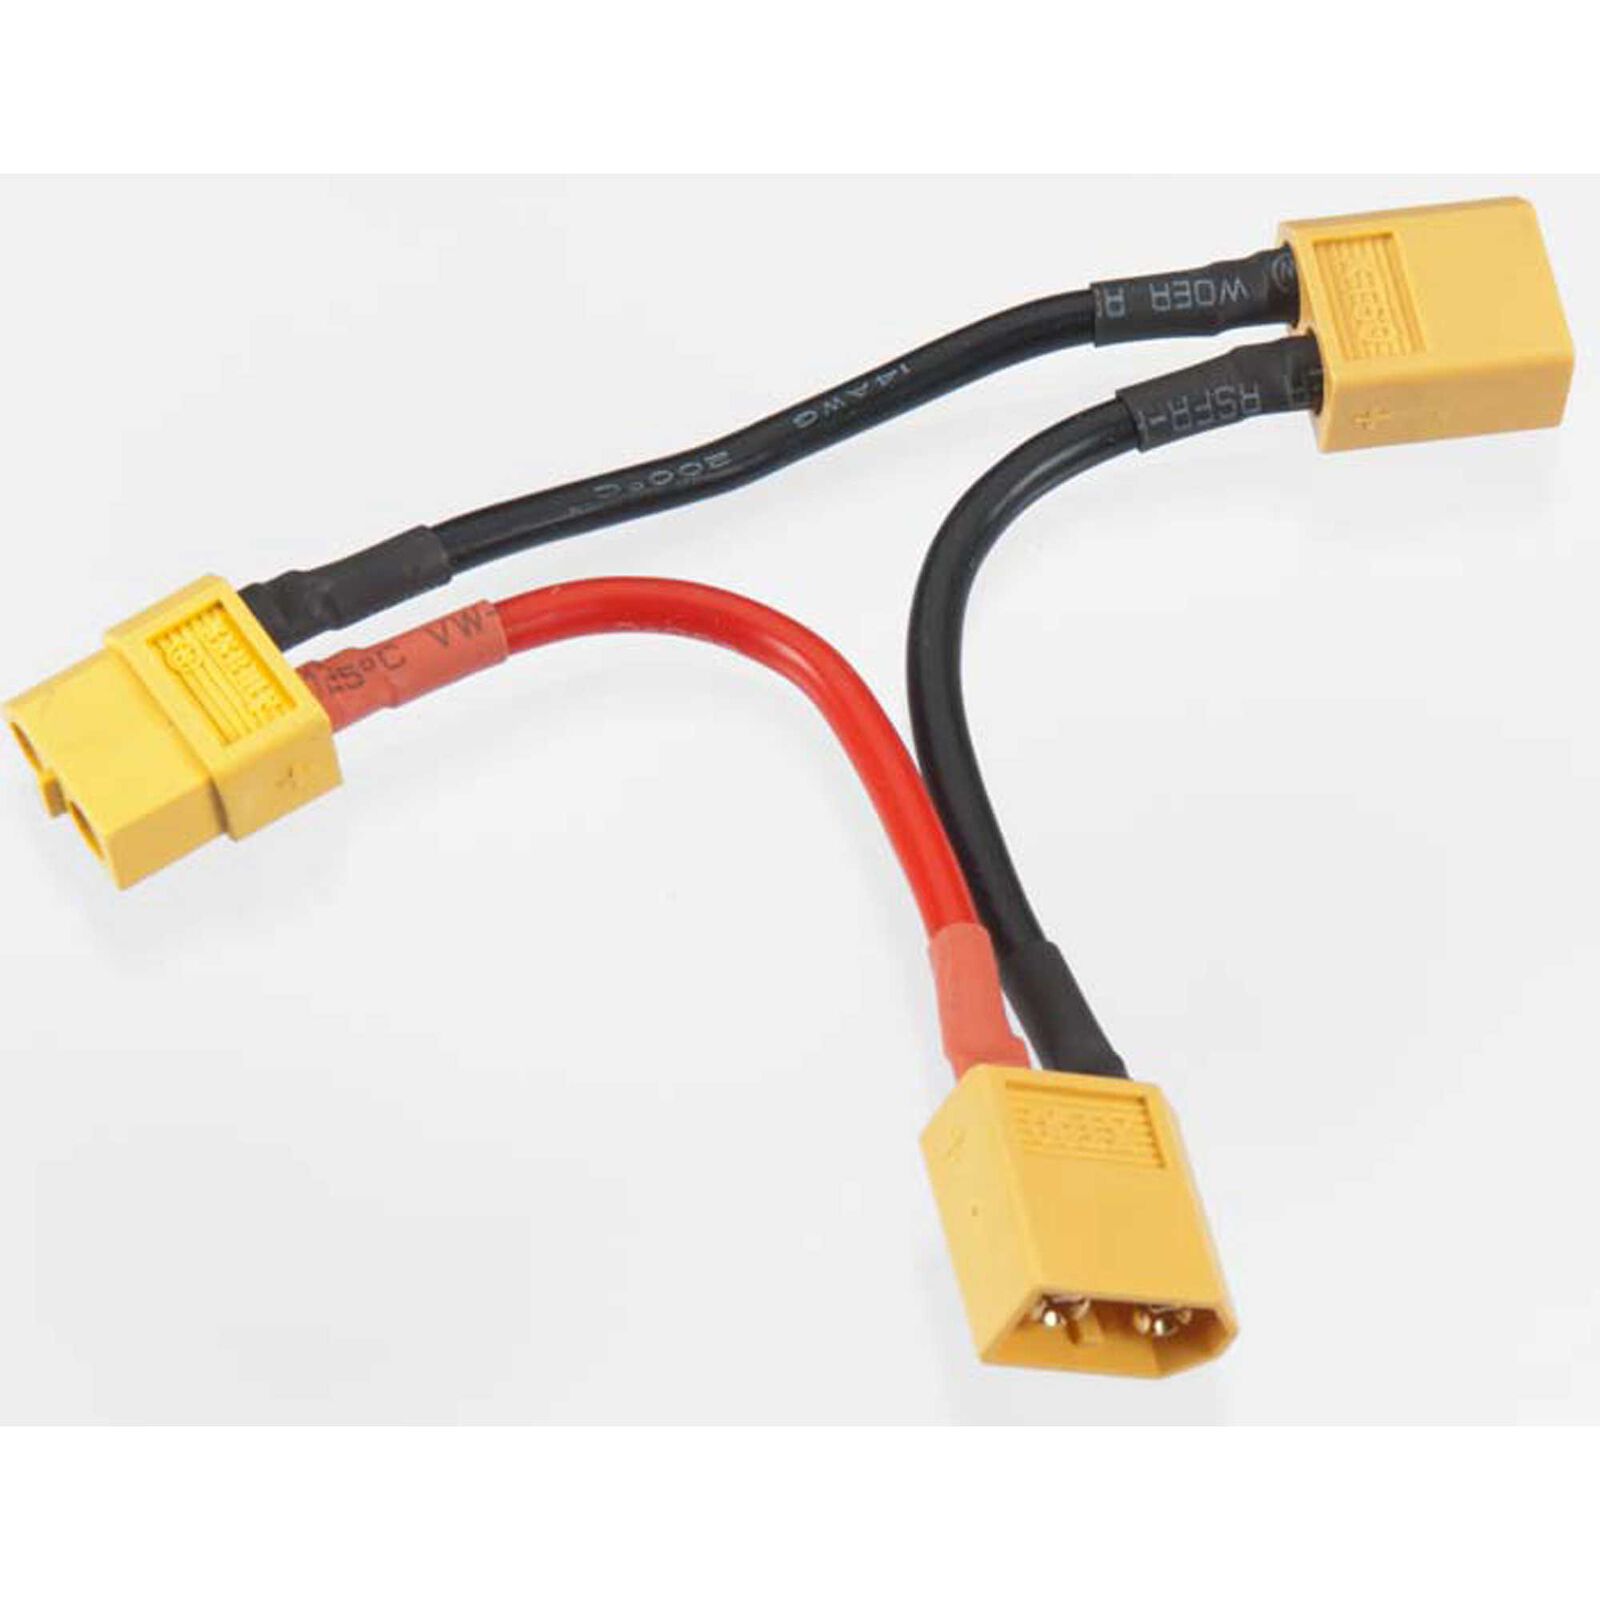 XT60 Series 2-Battery Connector Adapter Wire Harness